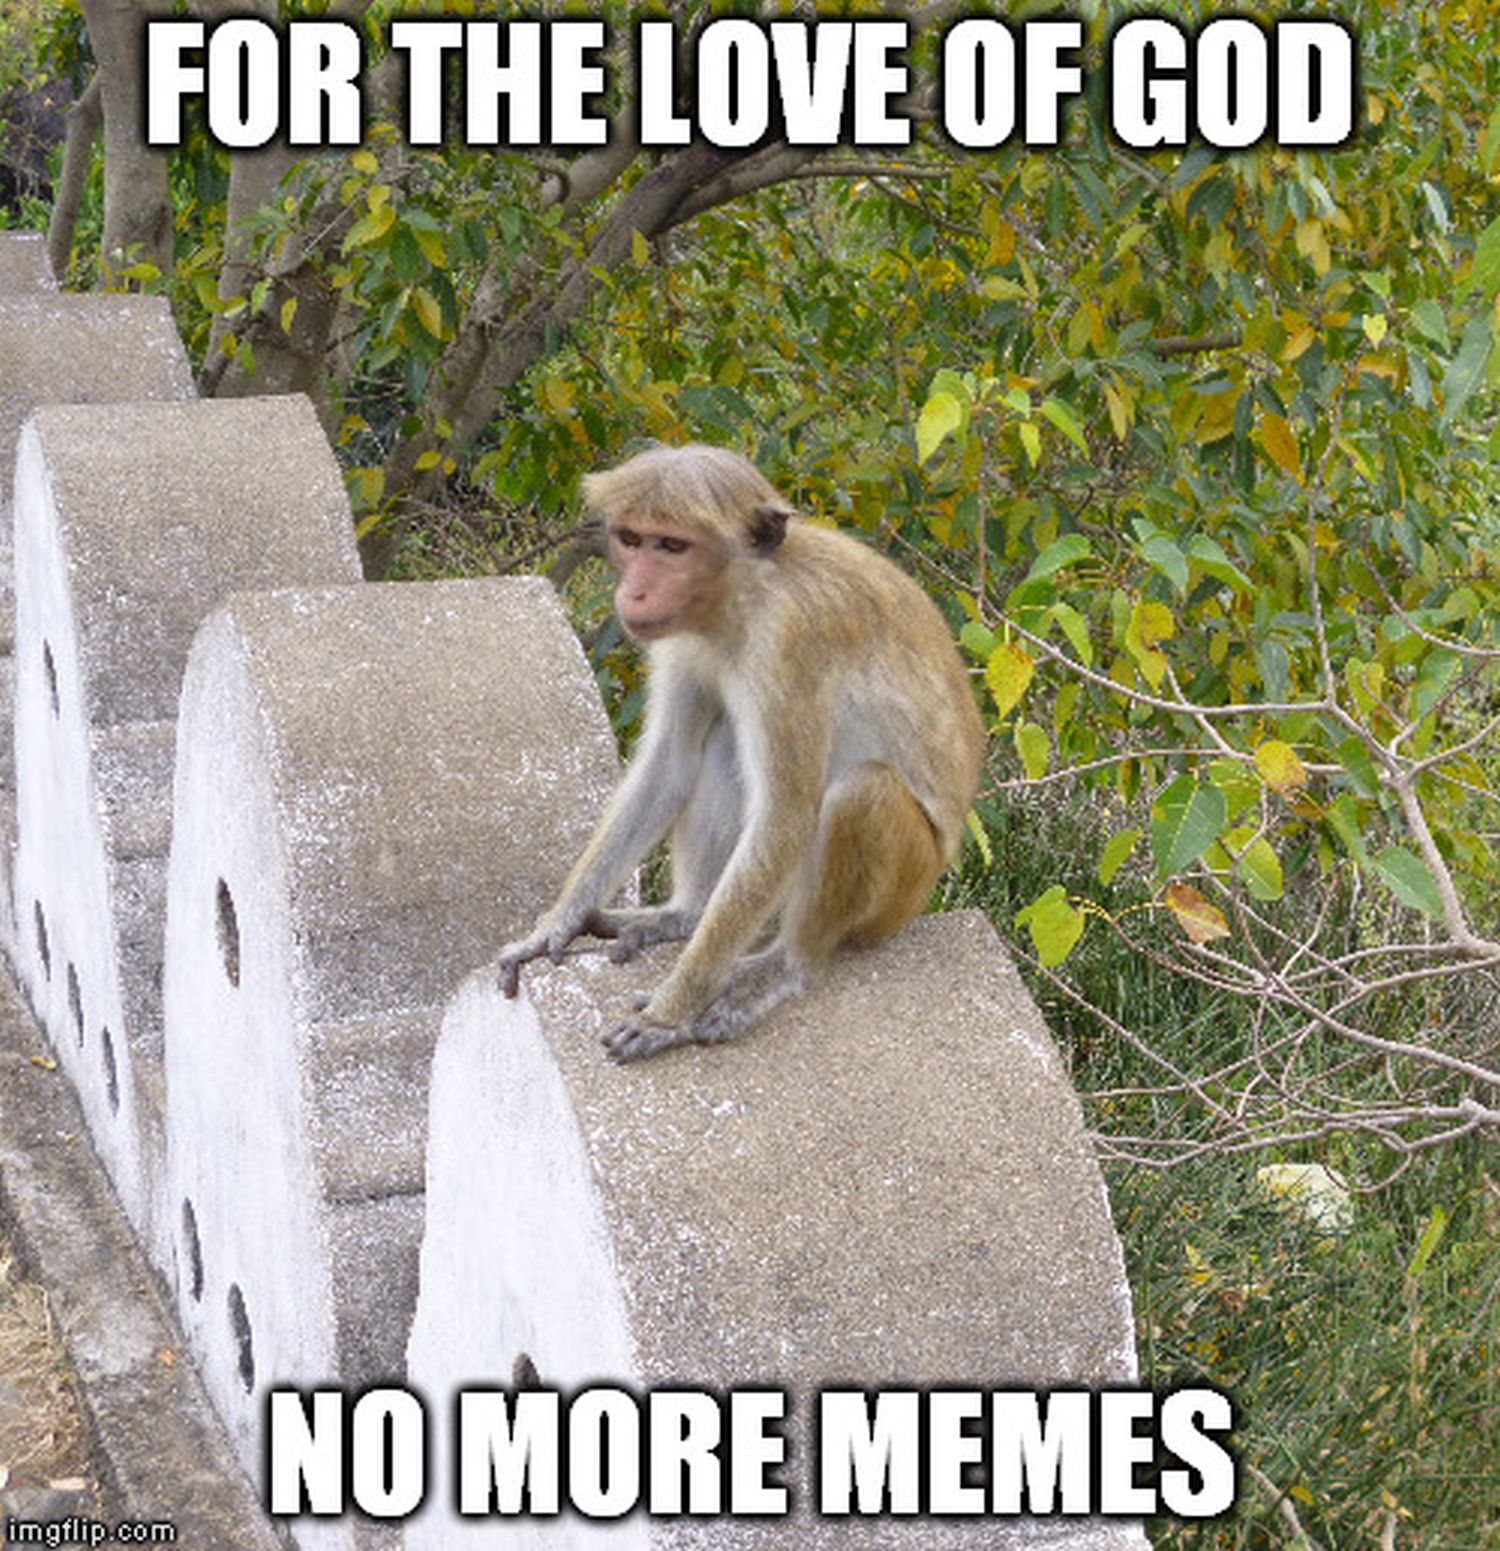 For the love of God no more Memes, says a Macaque monkey meme